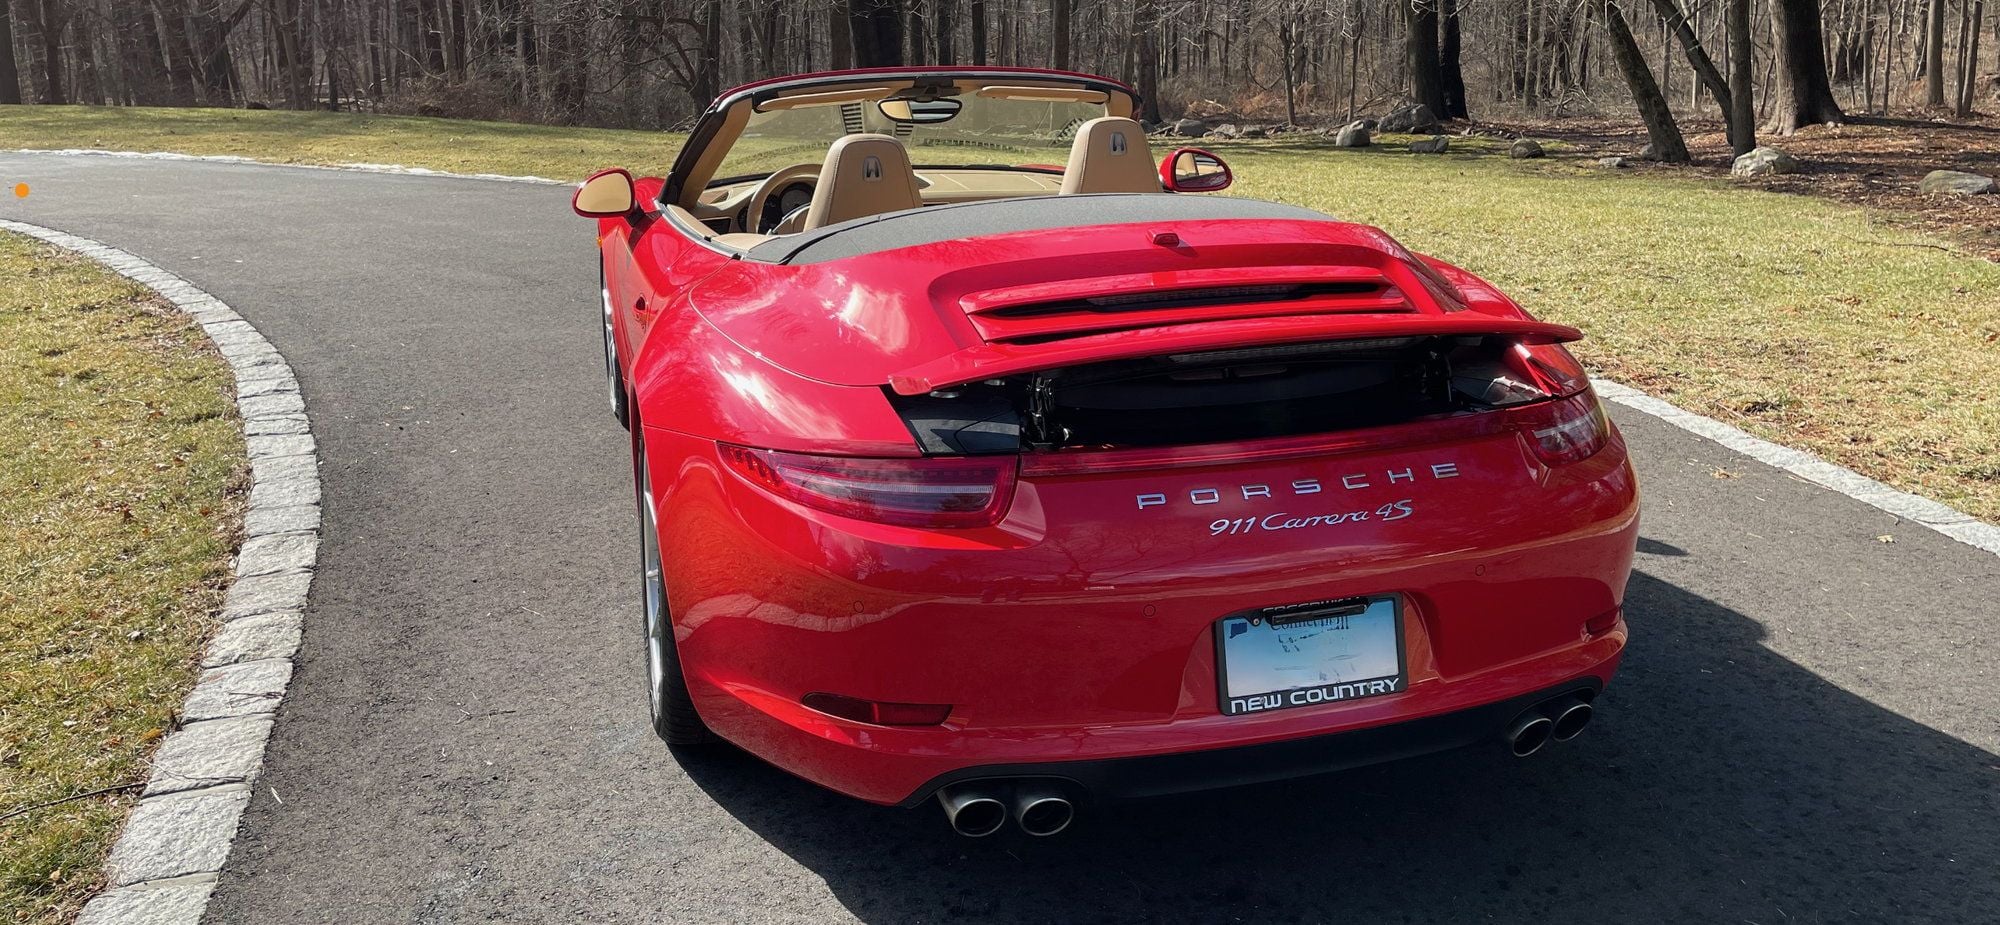 2013 Porsche 911 - Only 1,959 Miles on 2013 Porsche 911 Carrera 4S Cabriolet in mint condition!!! - Used - VIN WPOCB2A90DS155531 - 1,959 Miles - 6 cyl - AWD - Automatic - Convertible - Red - Greenwich, CT 06830, United States